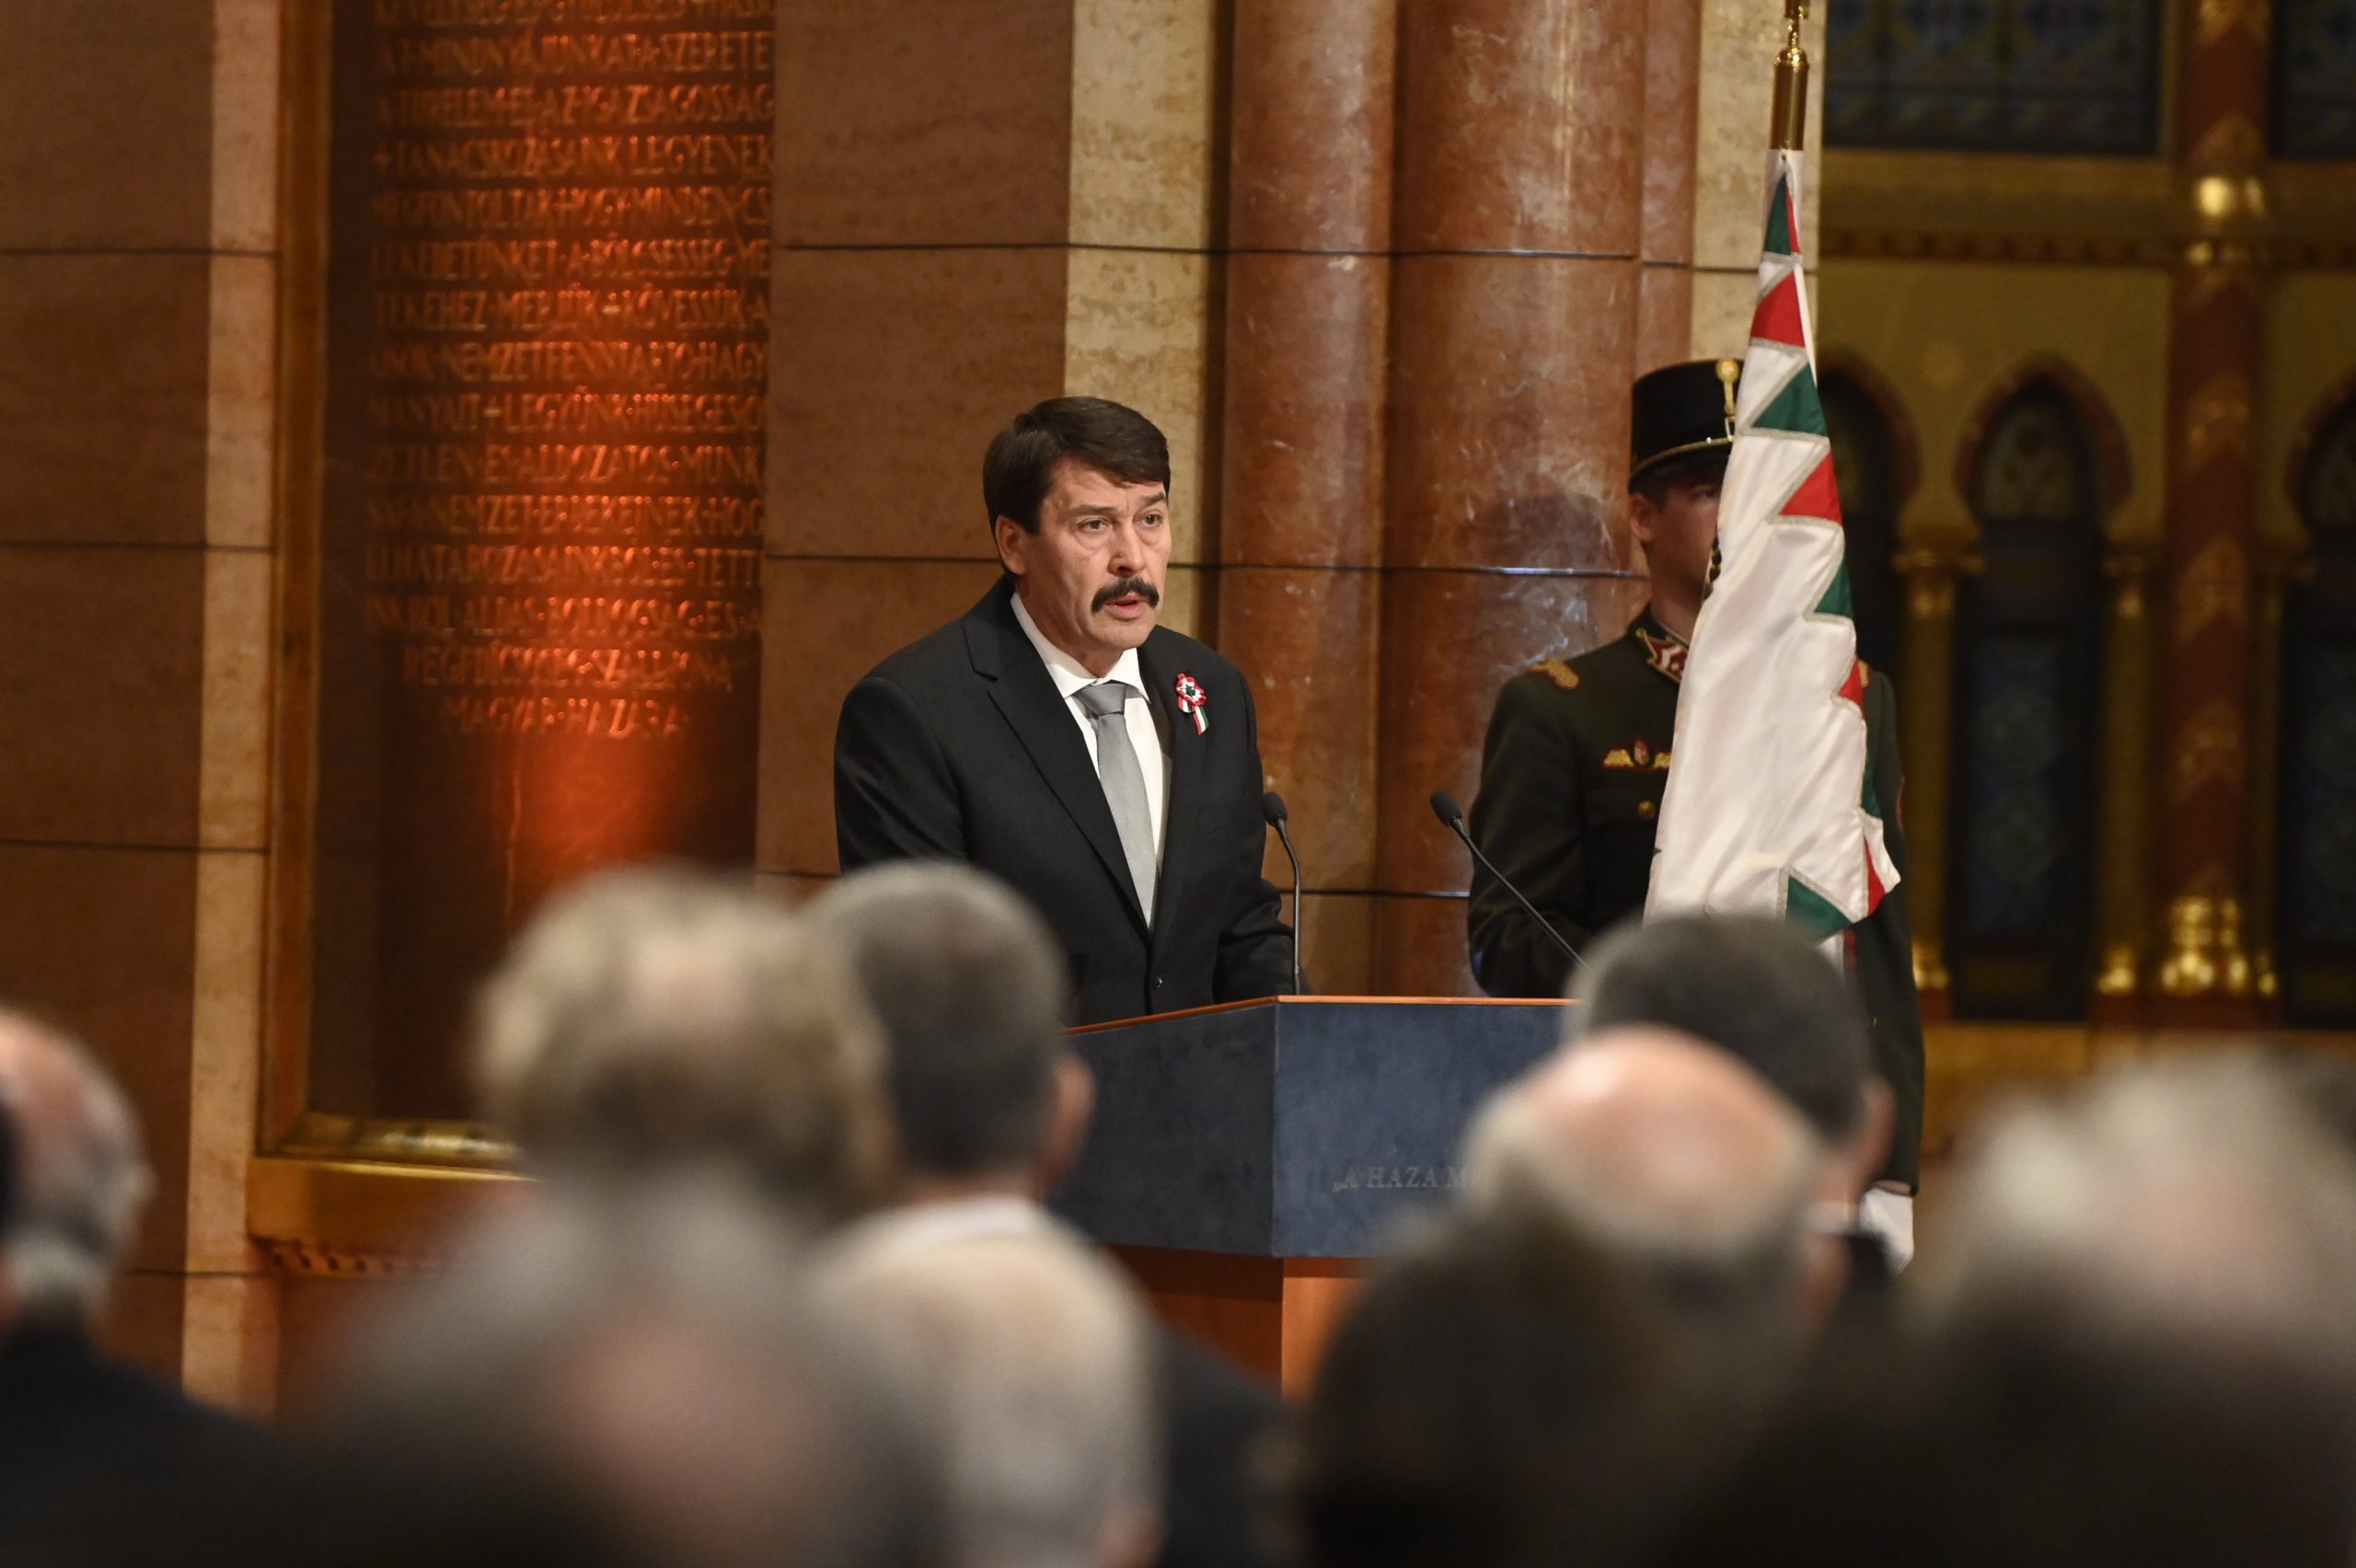 March 15 - President Áder: Hungarians in 1848 Wanted Freedom and Peace